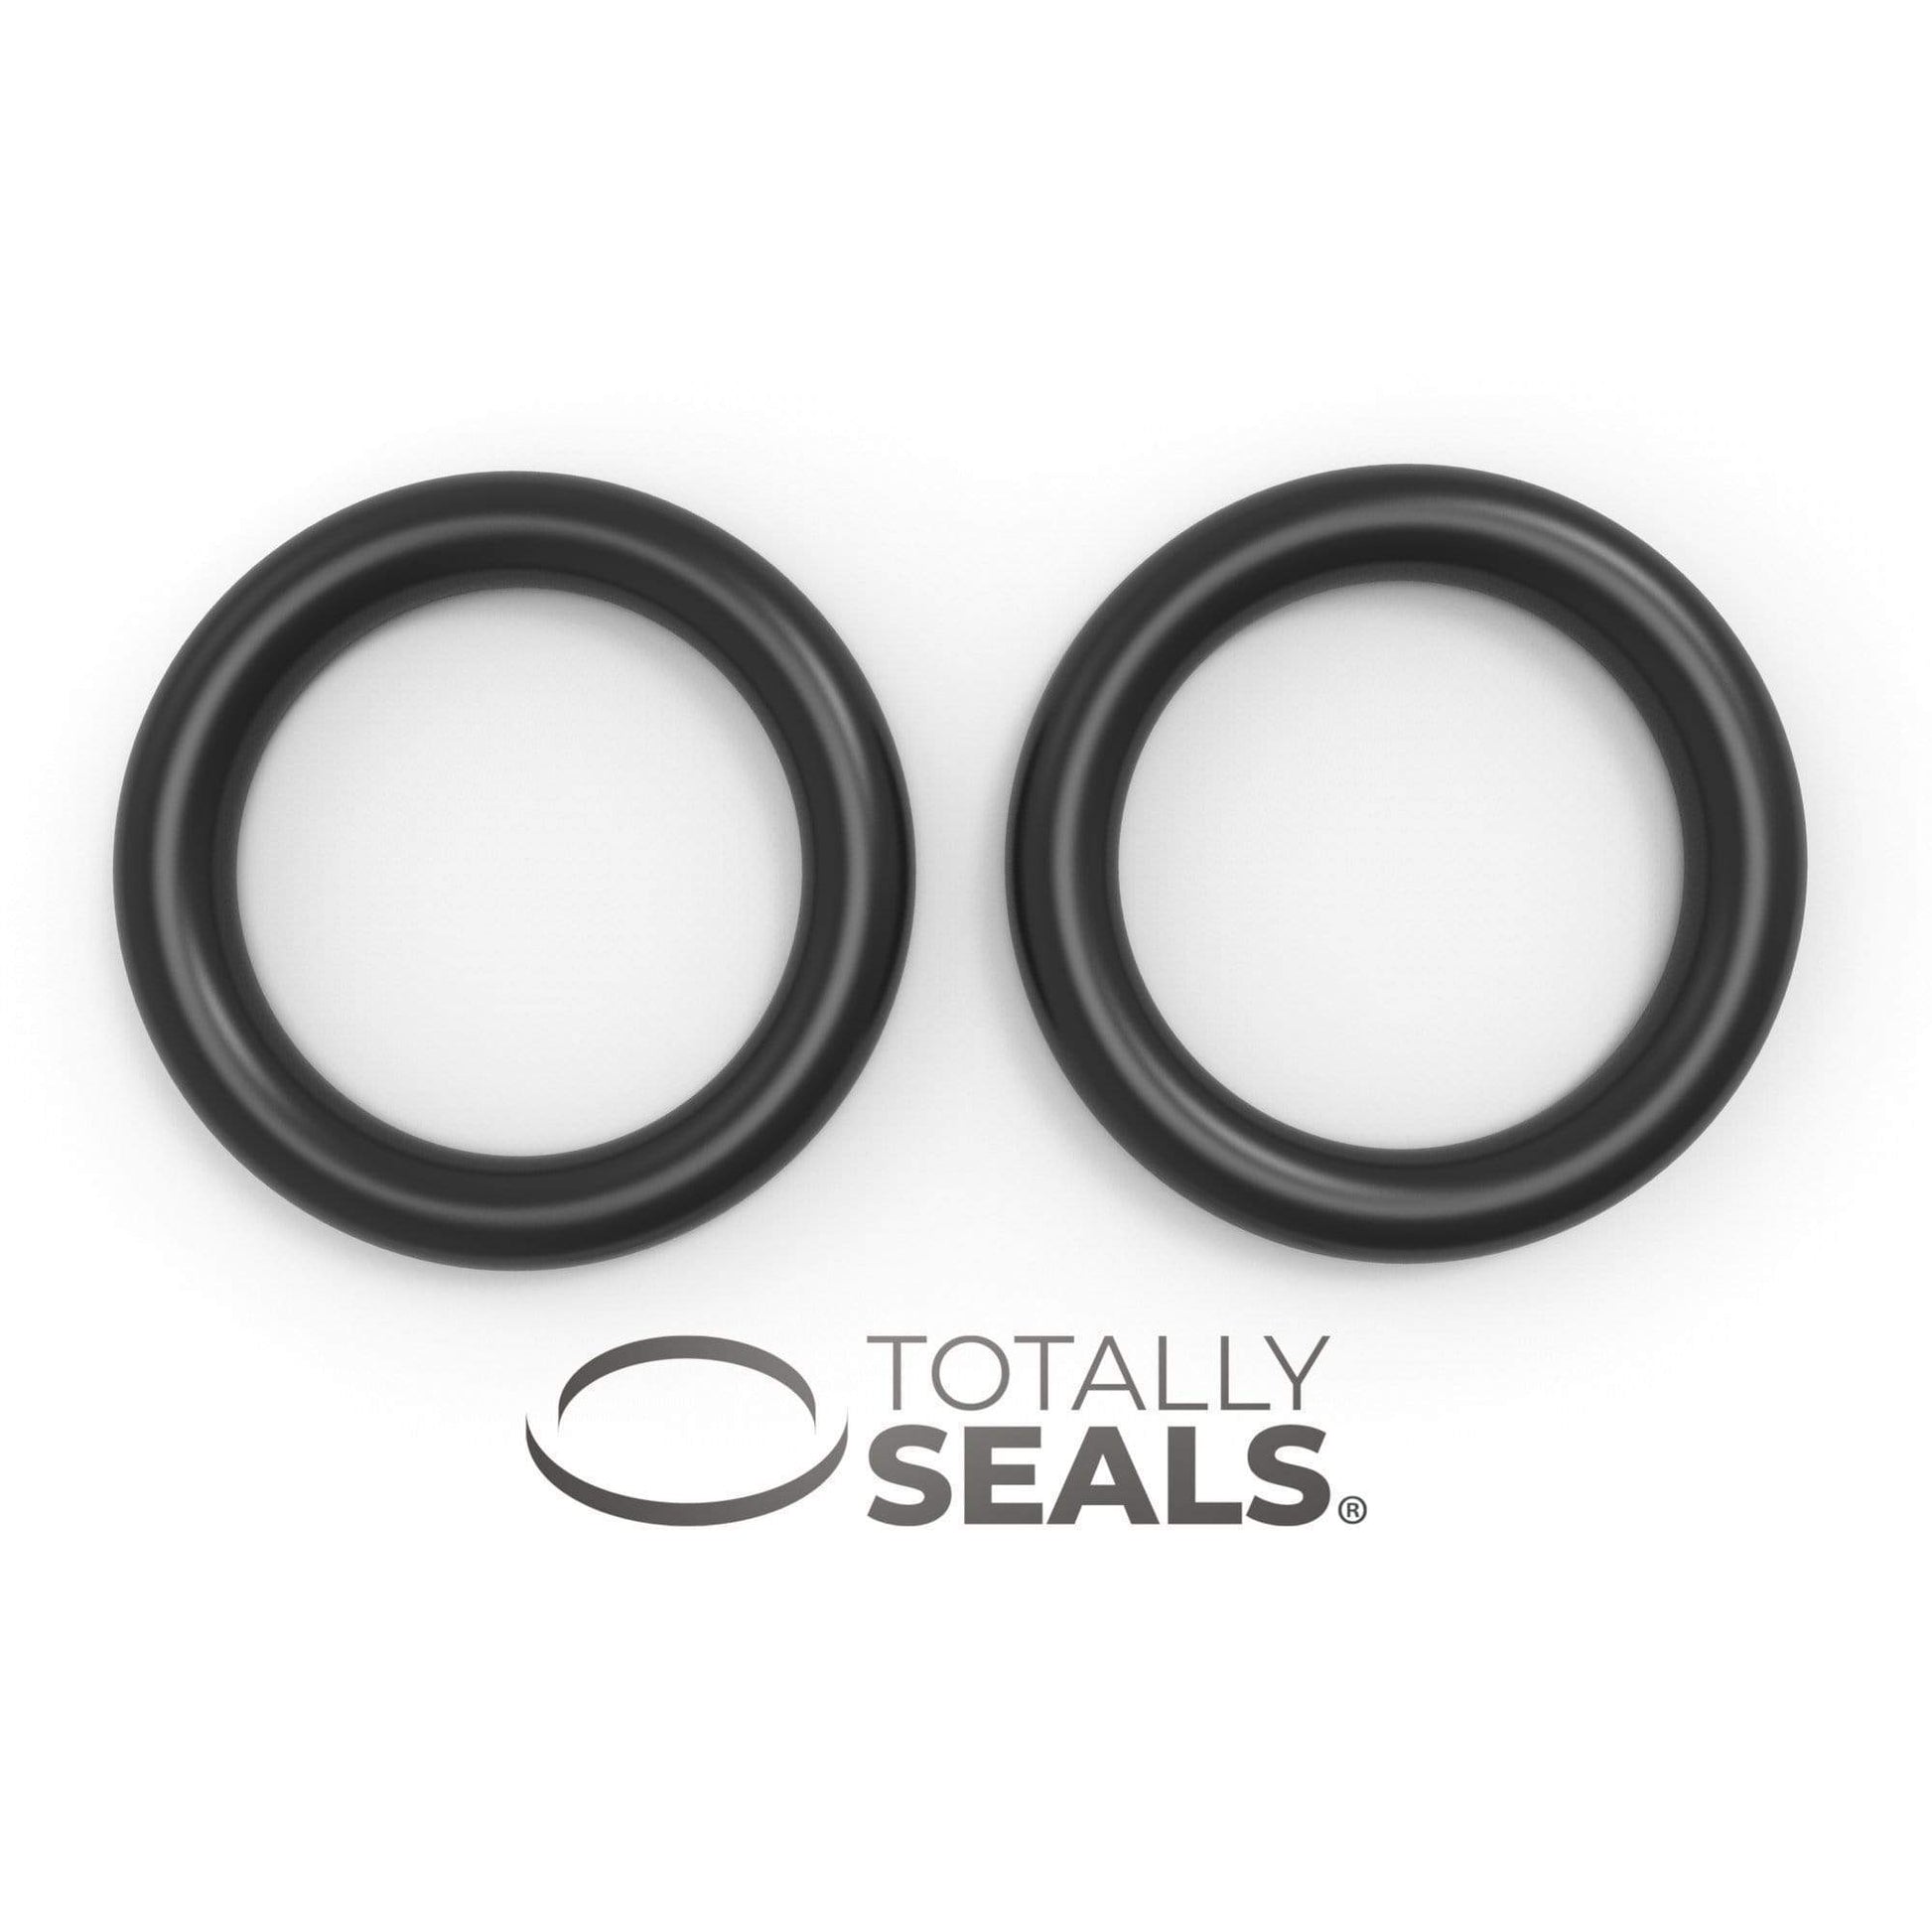 1-3/8" x 1/8" (BS220) Imperial Nitrile O-Rings - Totally Seals®